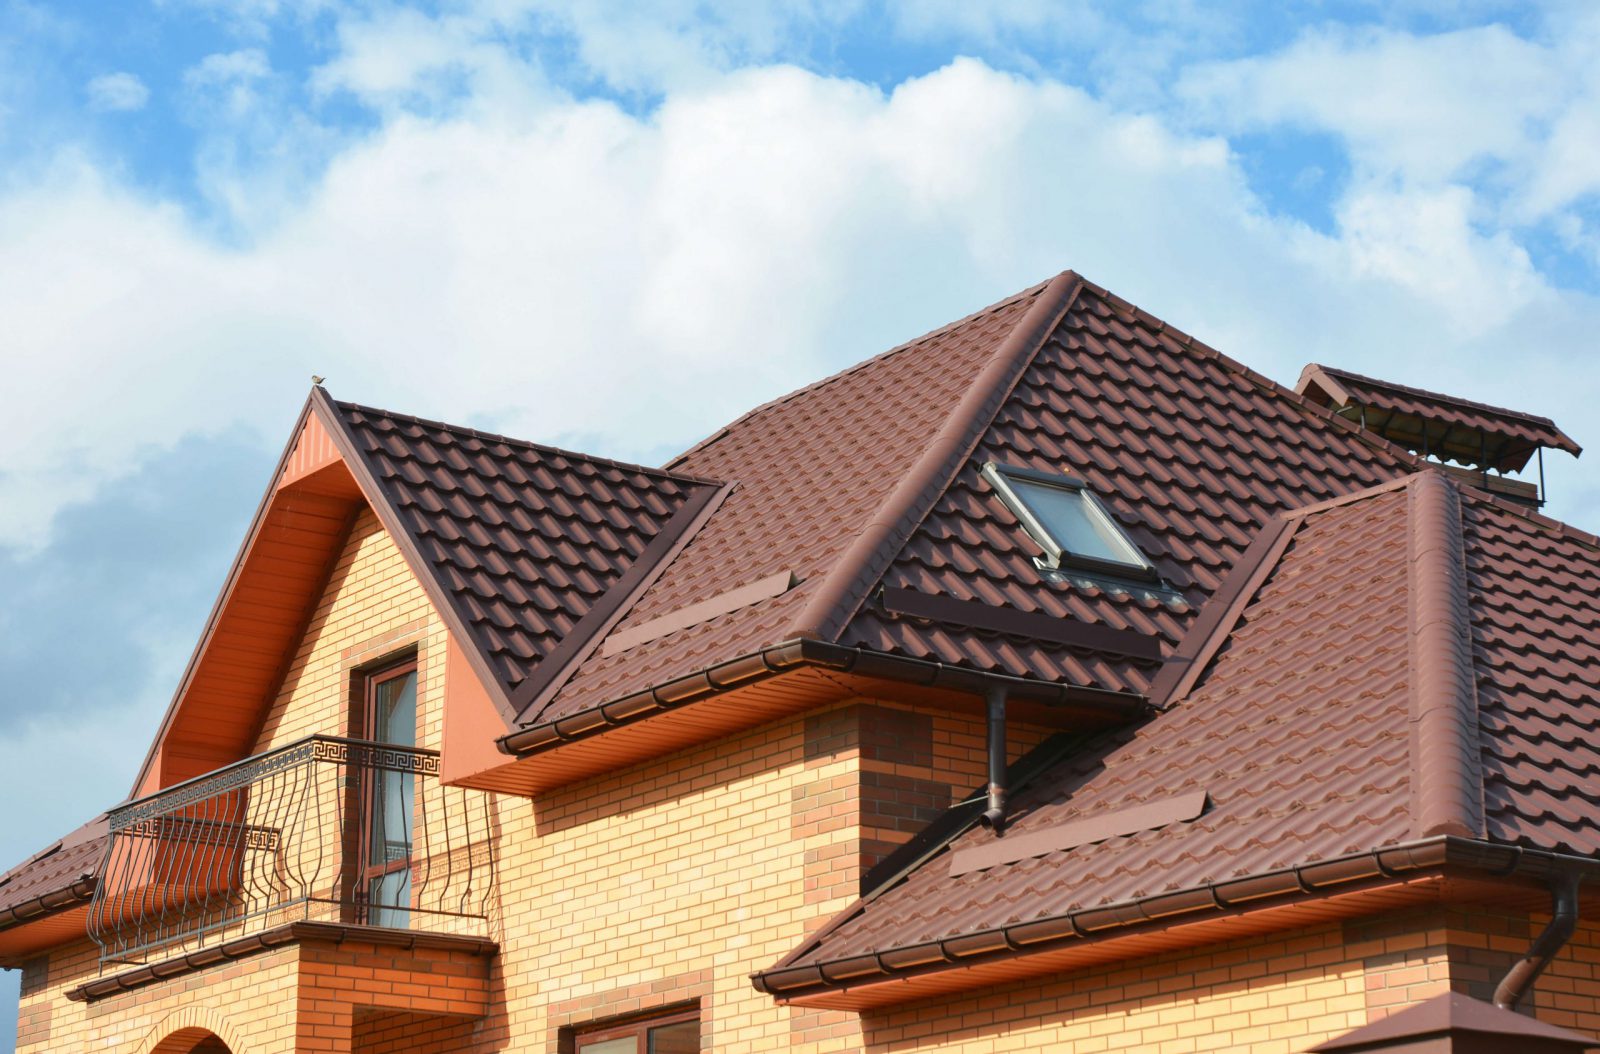 roofing-companies